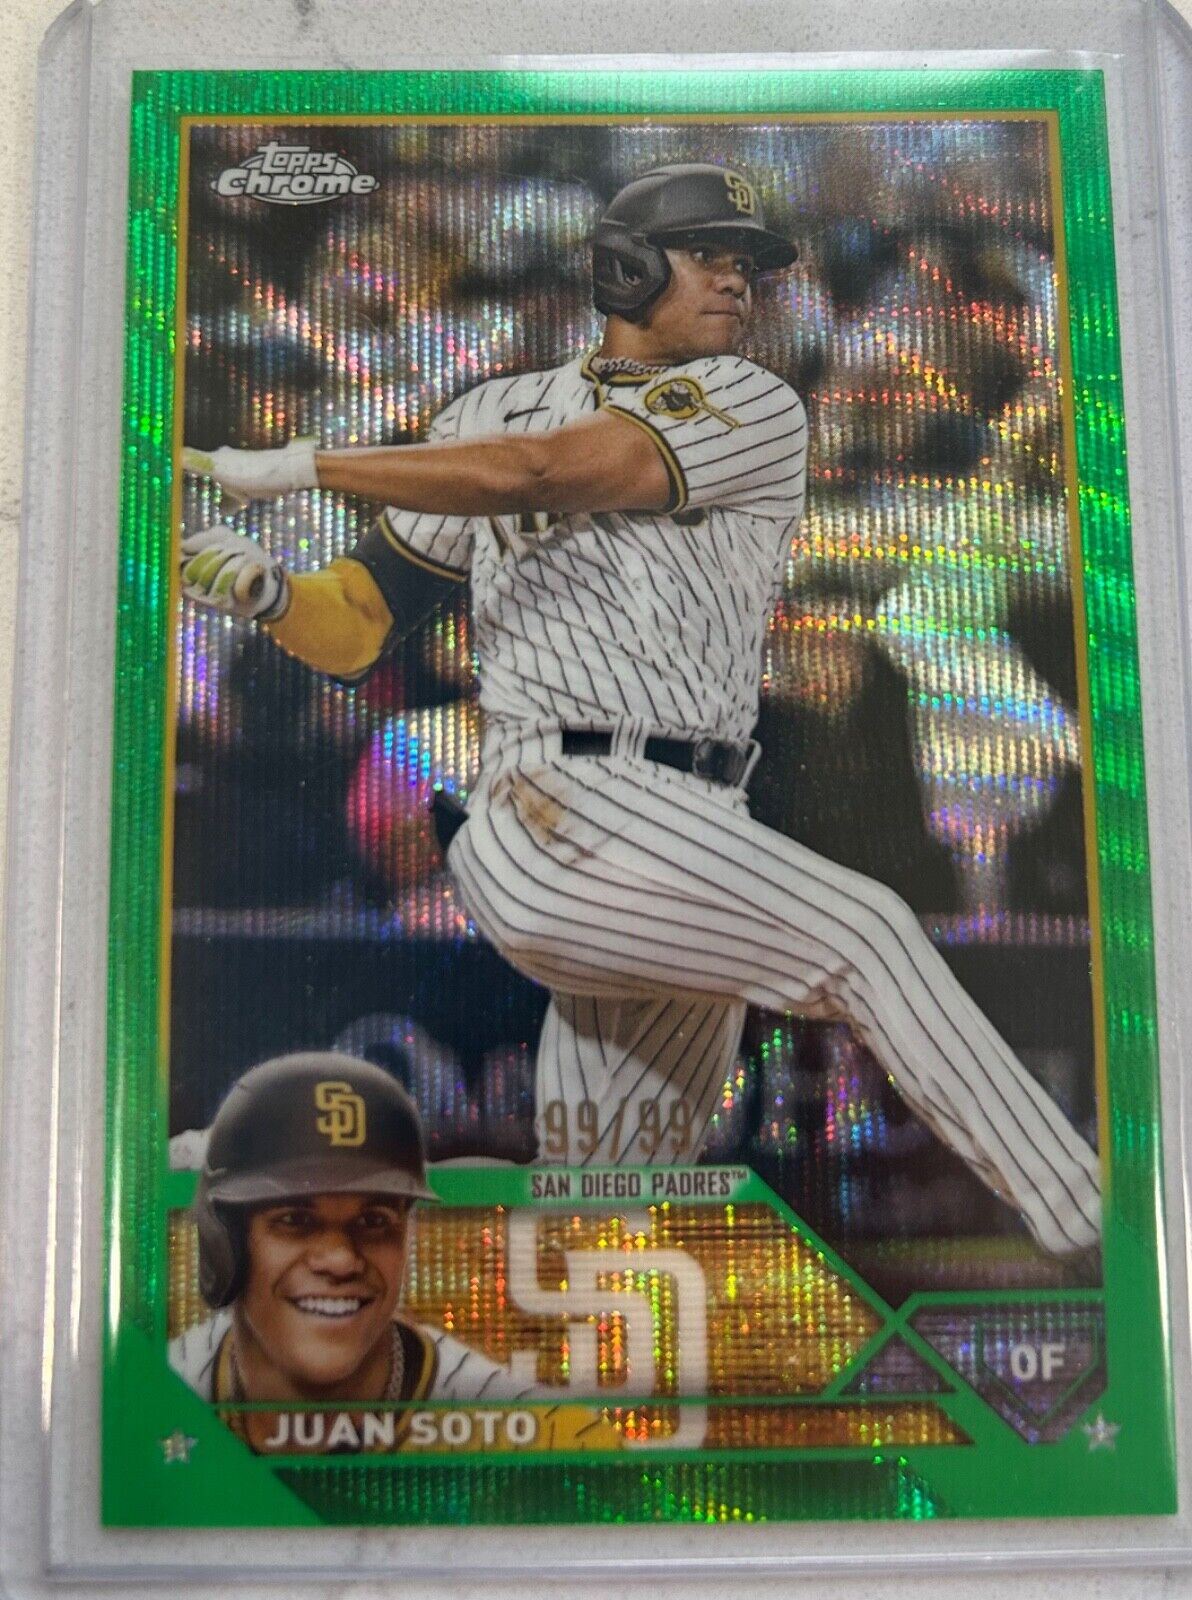 2023 Topps Chrome Juan Soto #100 Green Wave Refractor /99 San Diego Padres